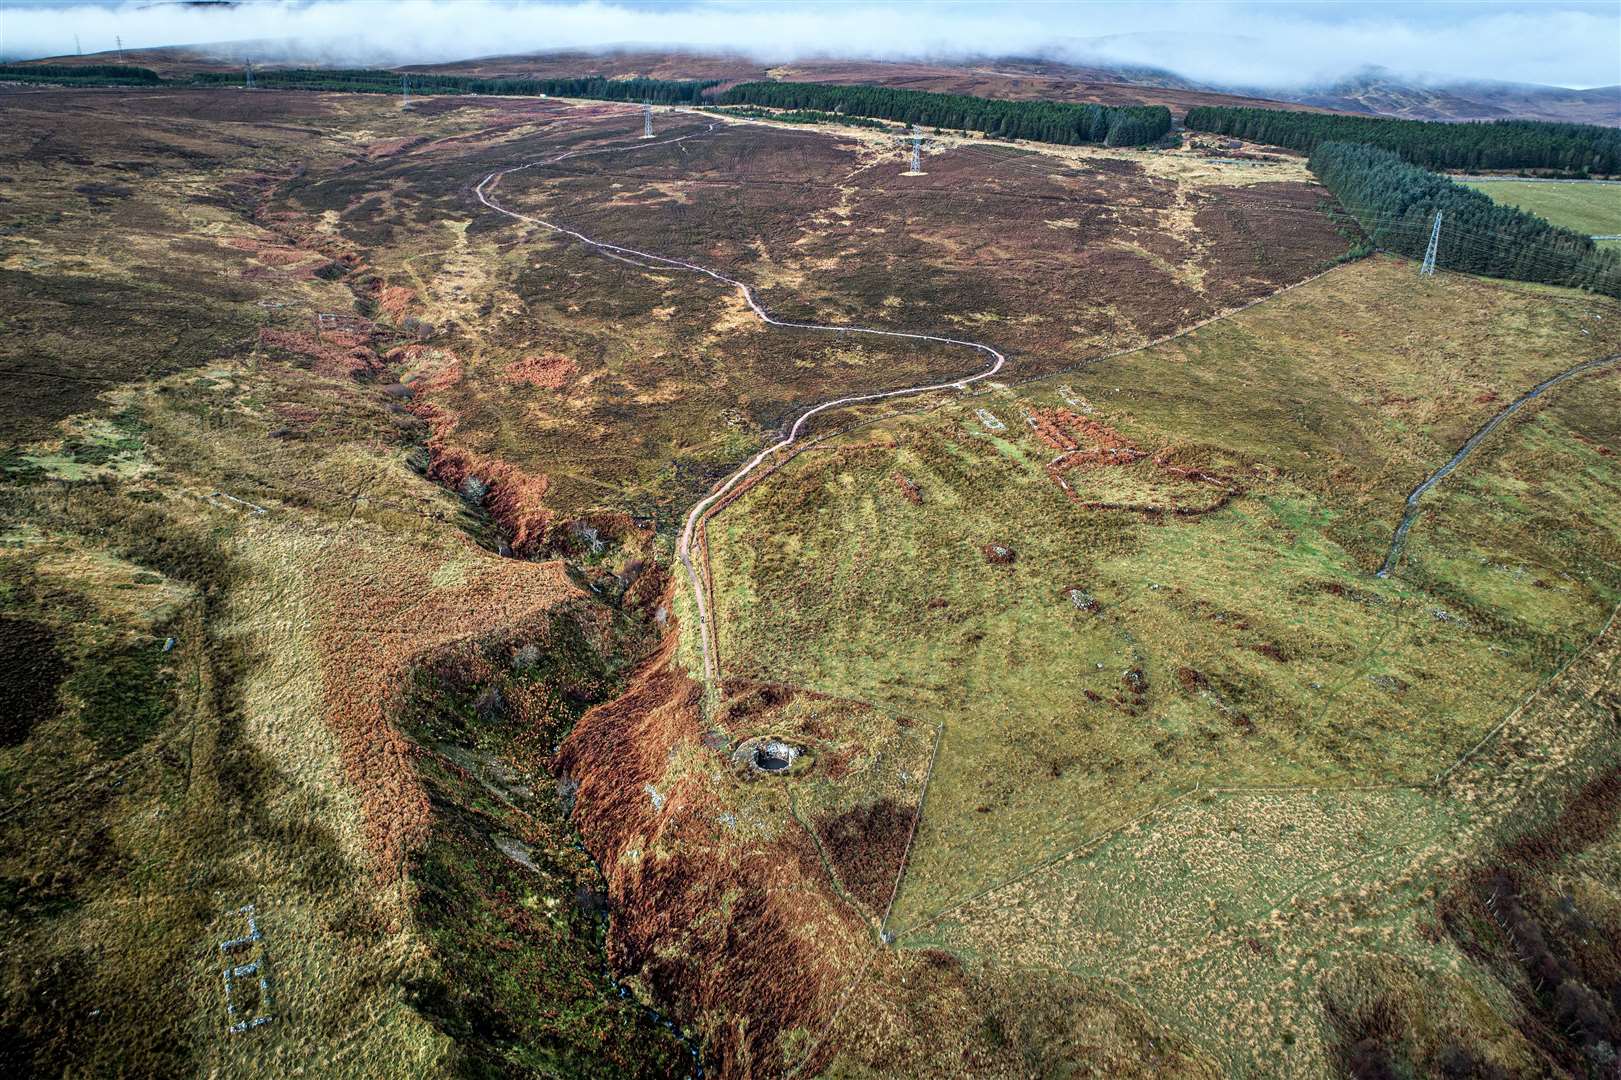 Nestled at the foot of two streams, Allt A'Bhurg and Ousdale Burn, the broch occupies a commanding position. To the upper right can be seen evidence of Borg, a post-medieval clearance village, which took its name from the broch. Borg is Old Norse for 'fort', which is where the word 'broch' is derived. Picture: Angus Mackay